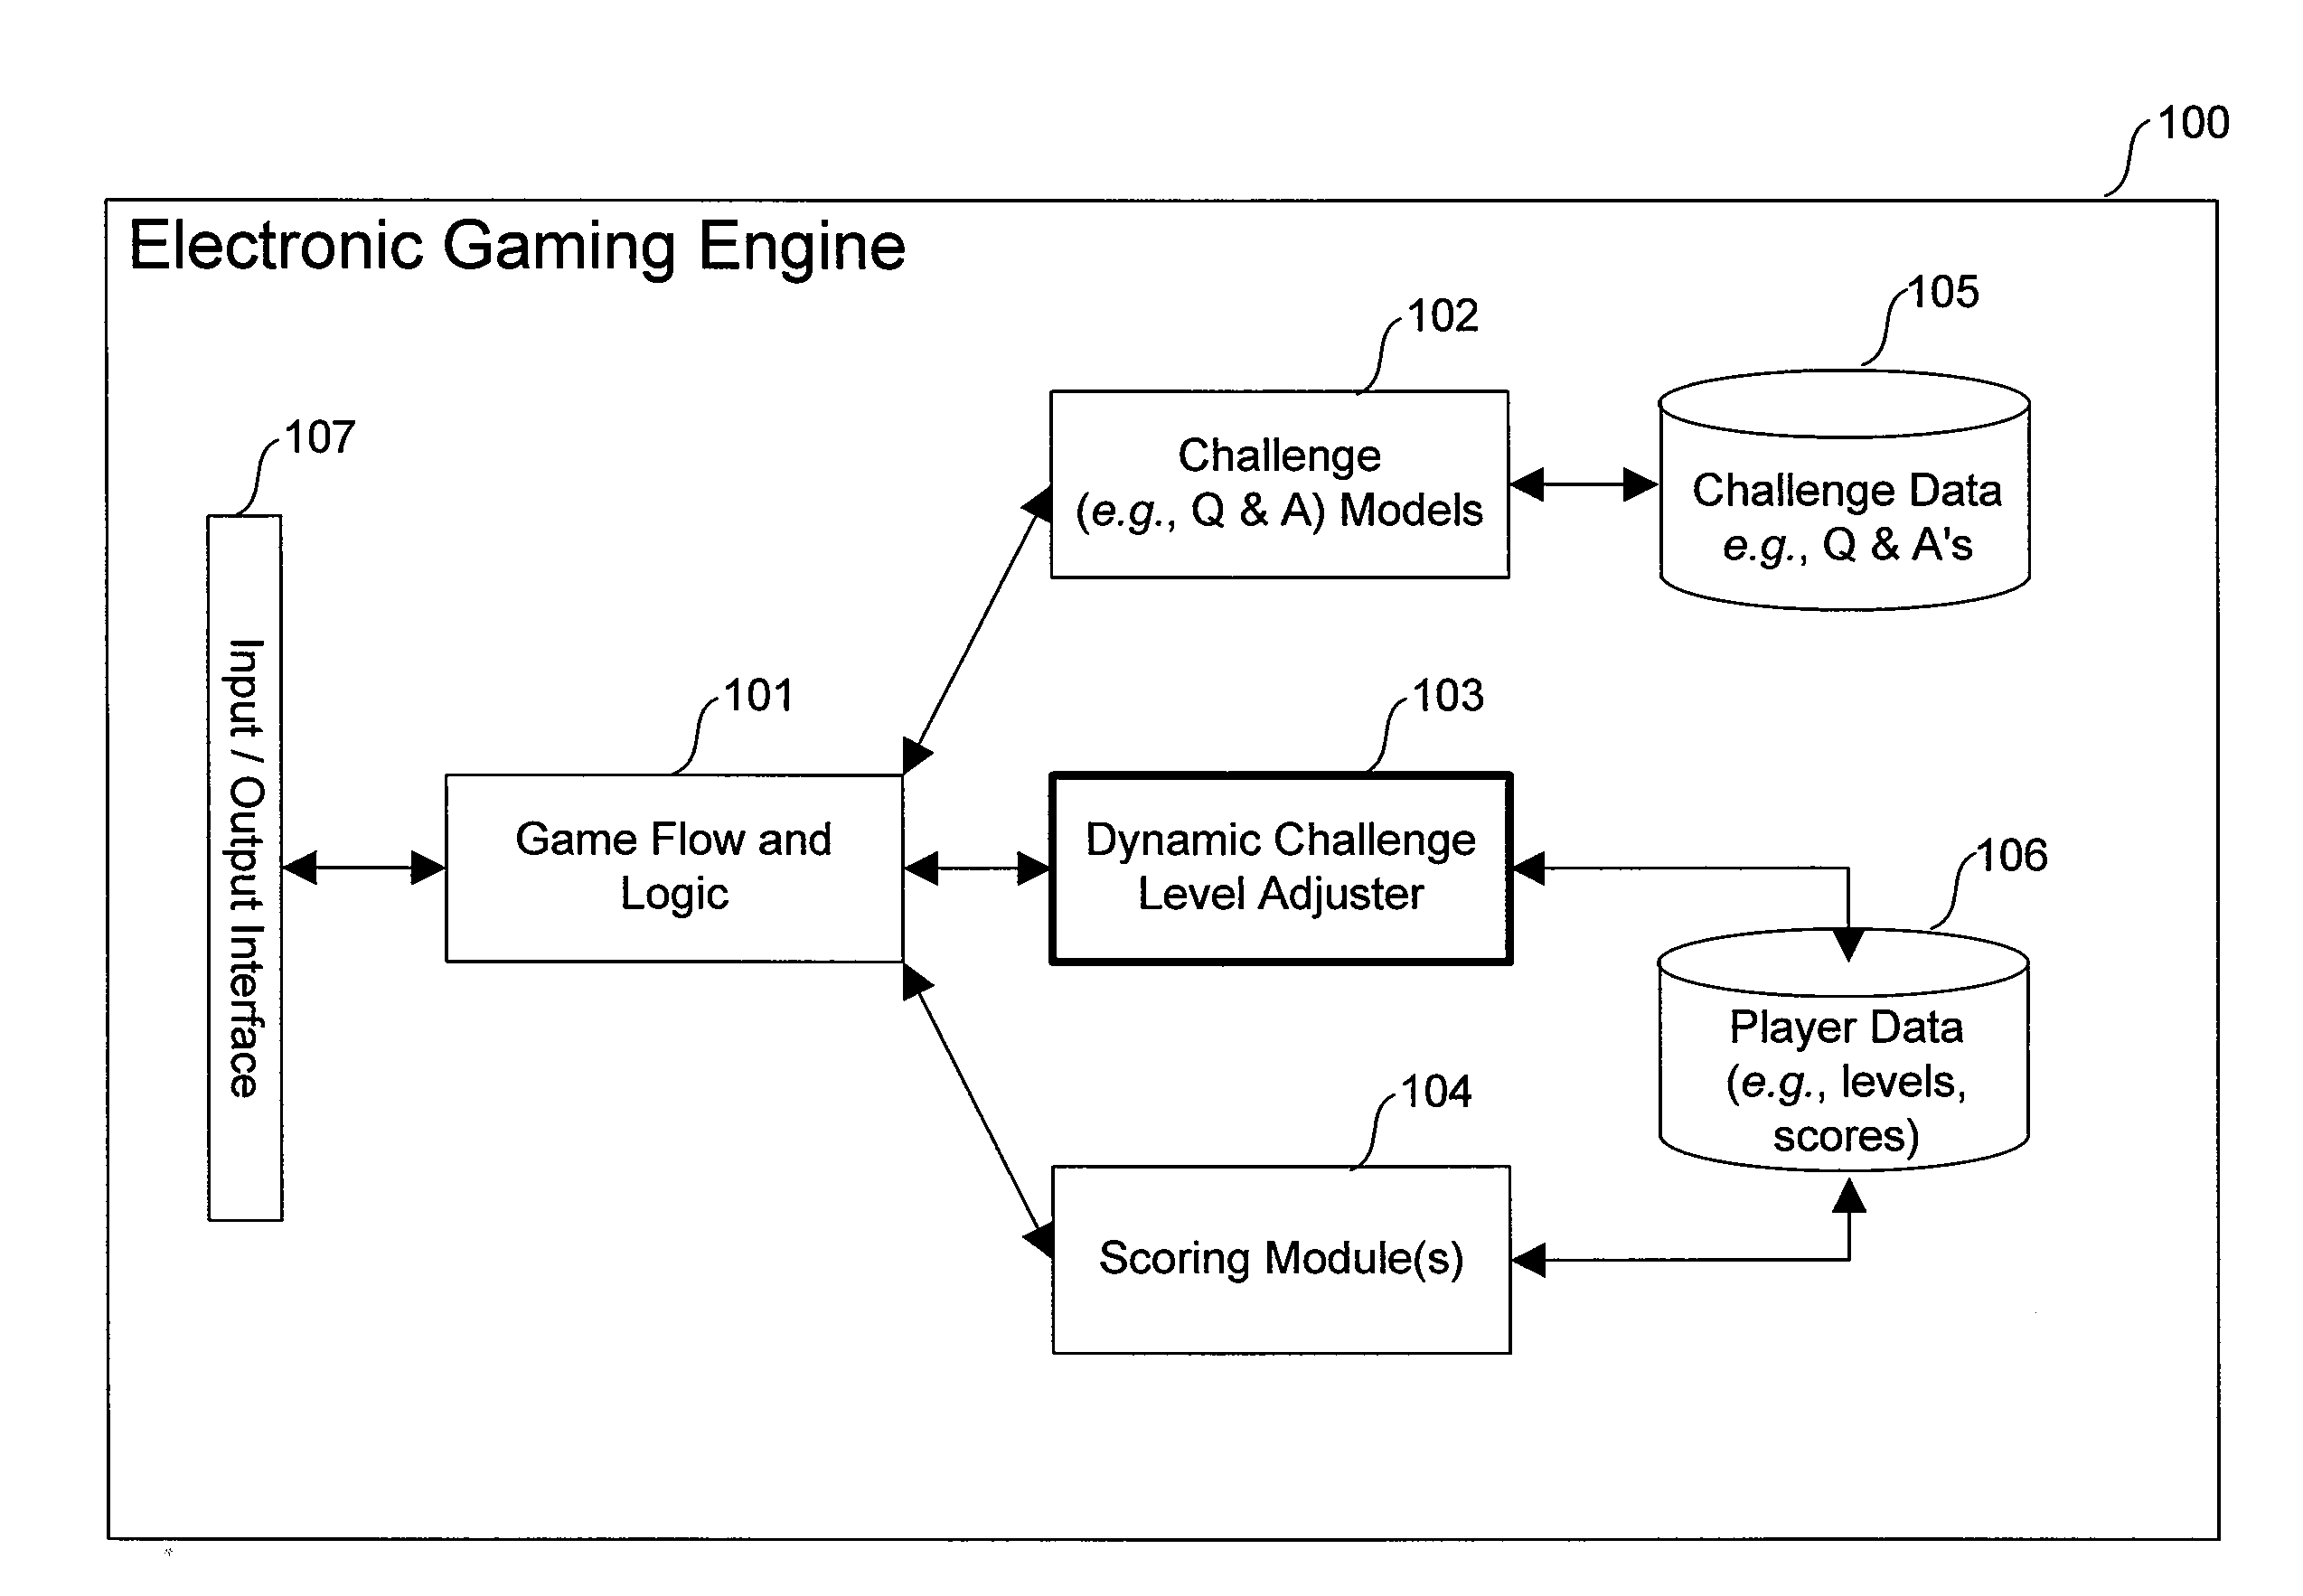 Method and system for dynamically leveling game play in electronic gaming environments